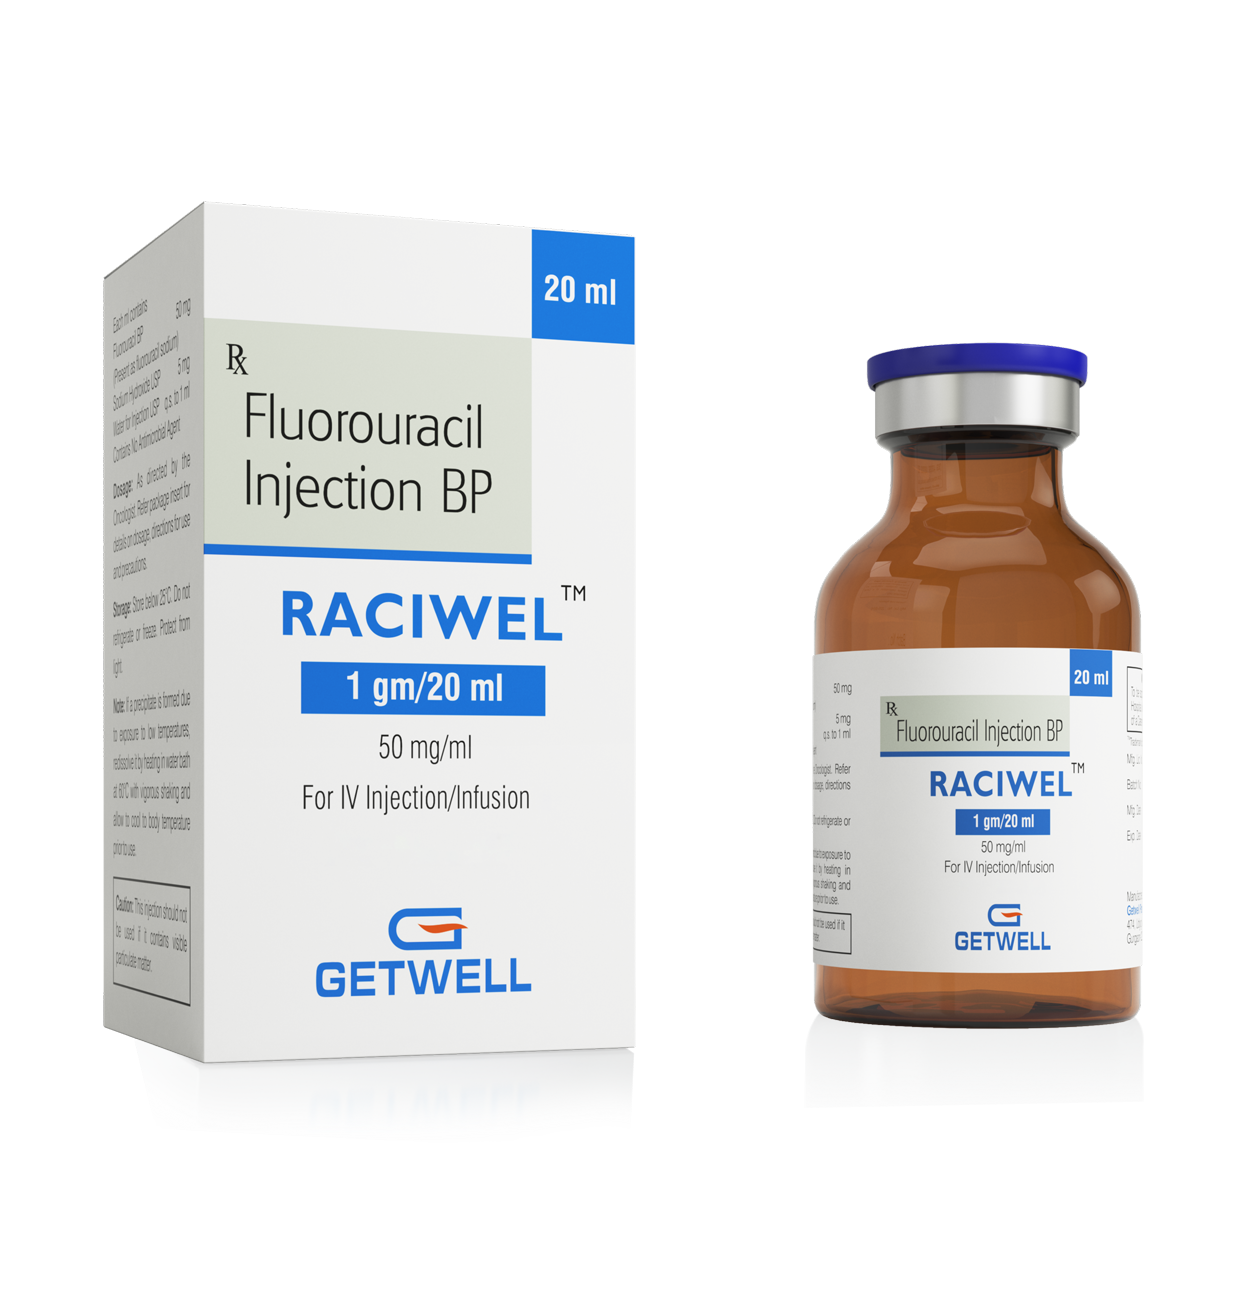 Raciwel_Injection_1g_new